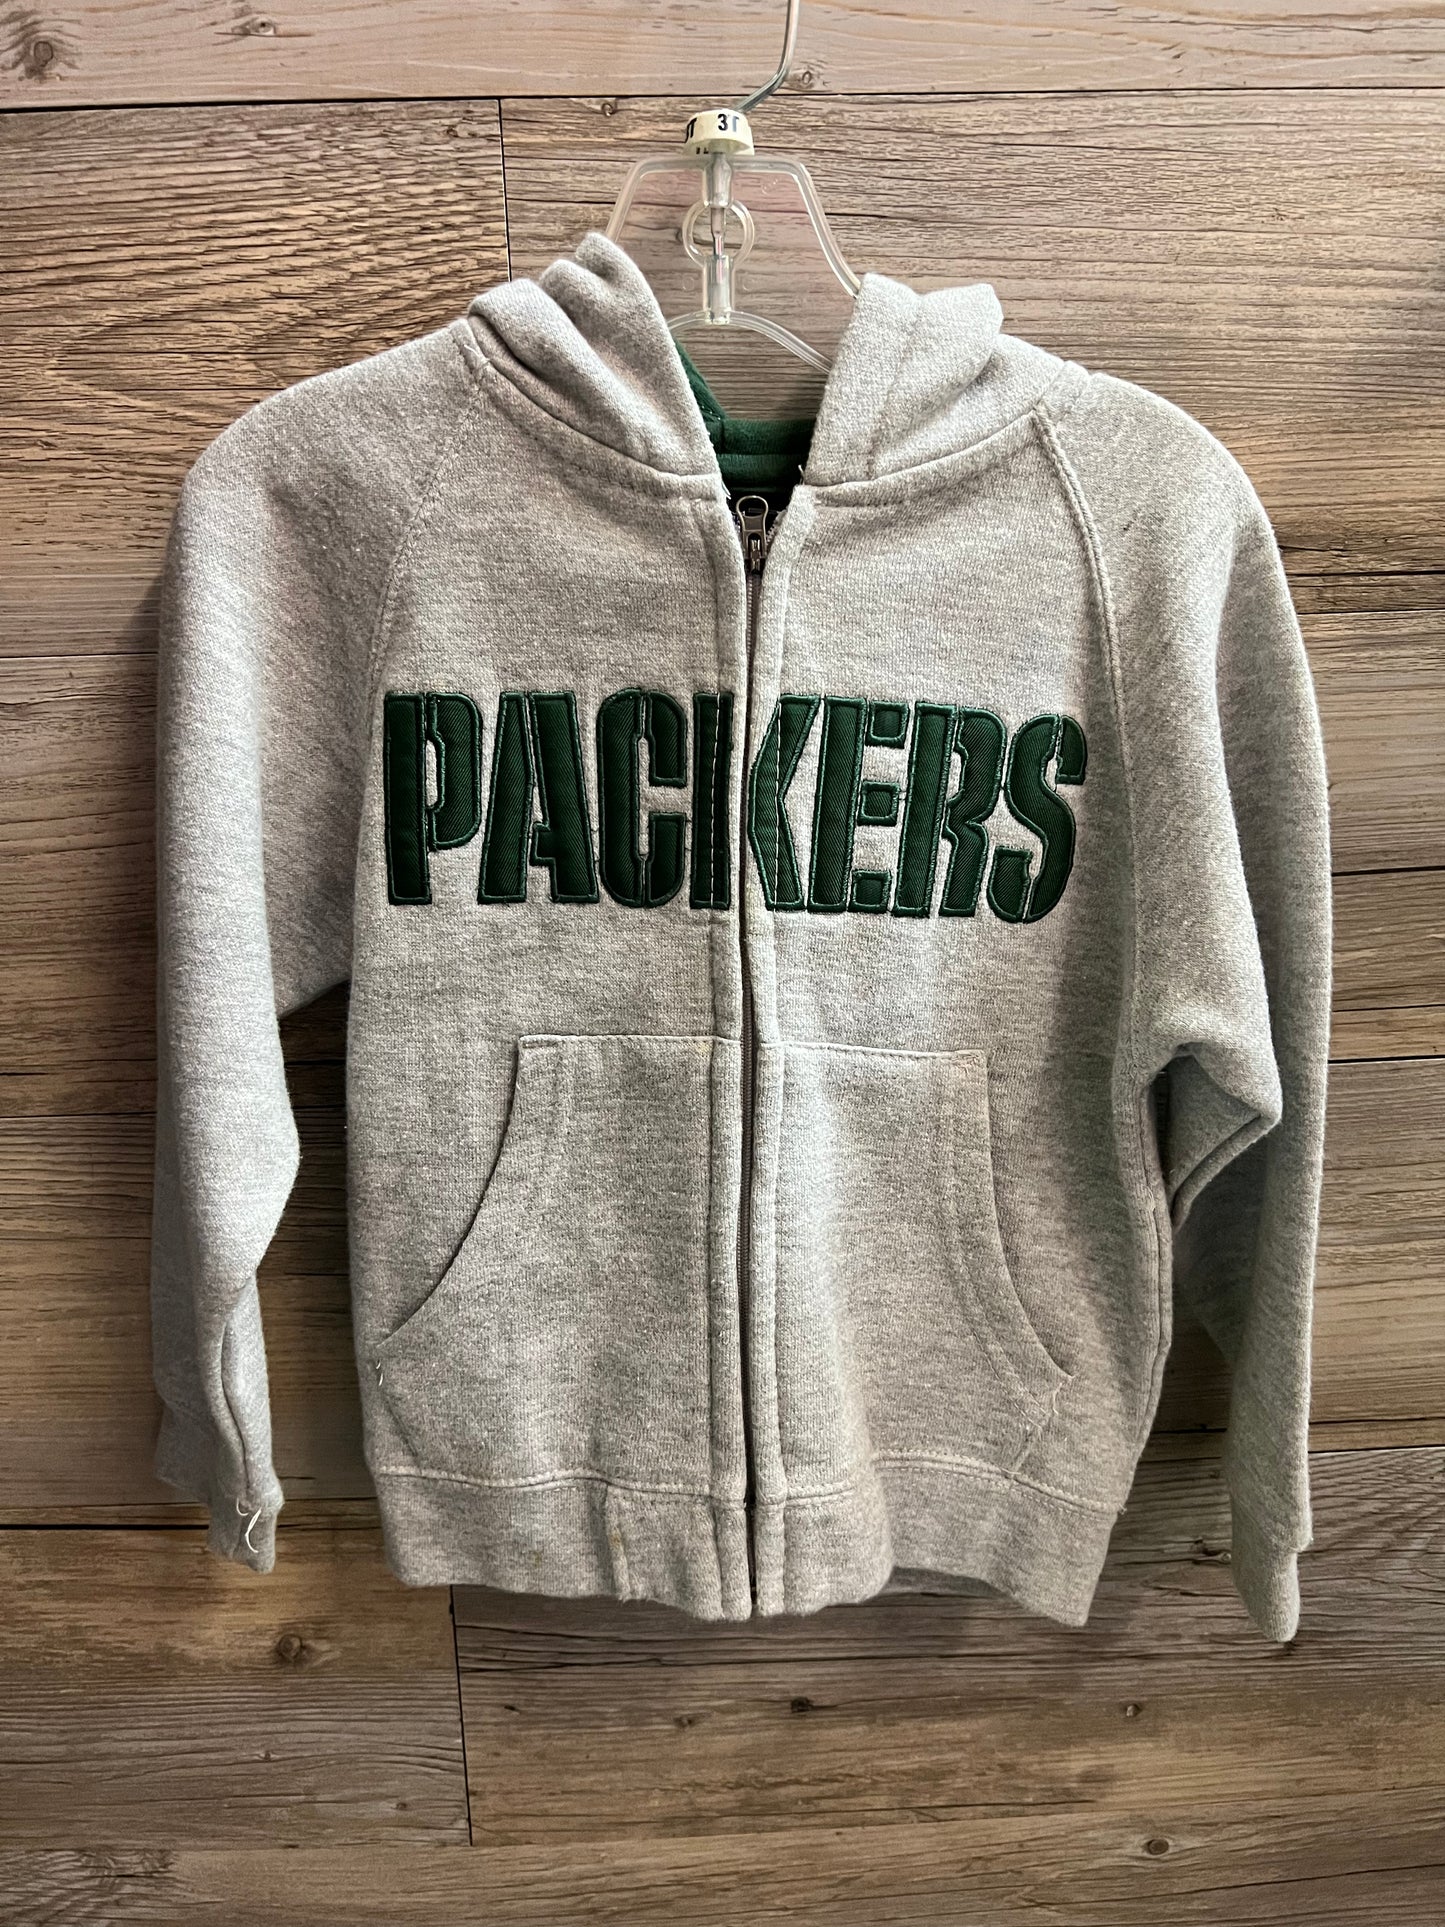 Packers Hooded Jacket, Size 3T